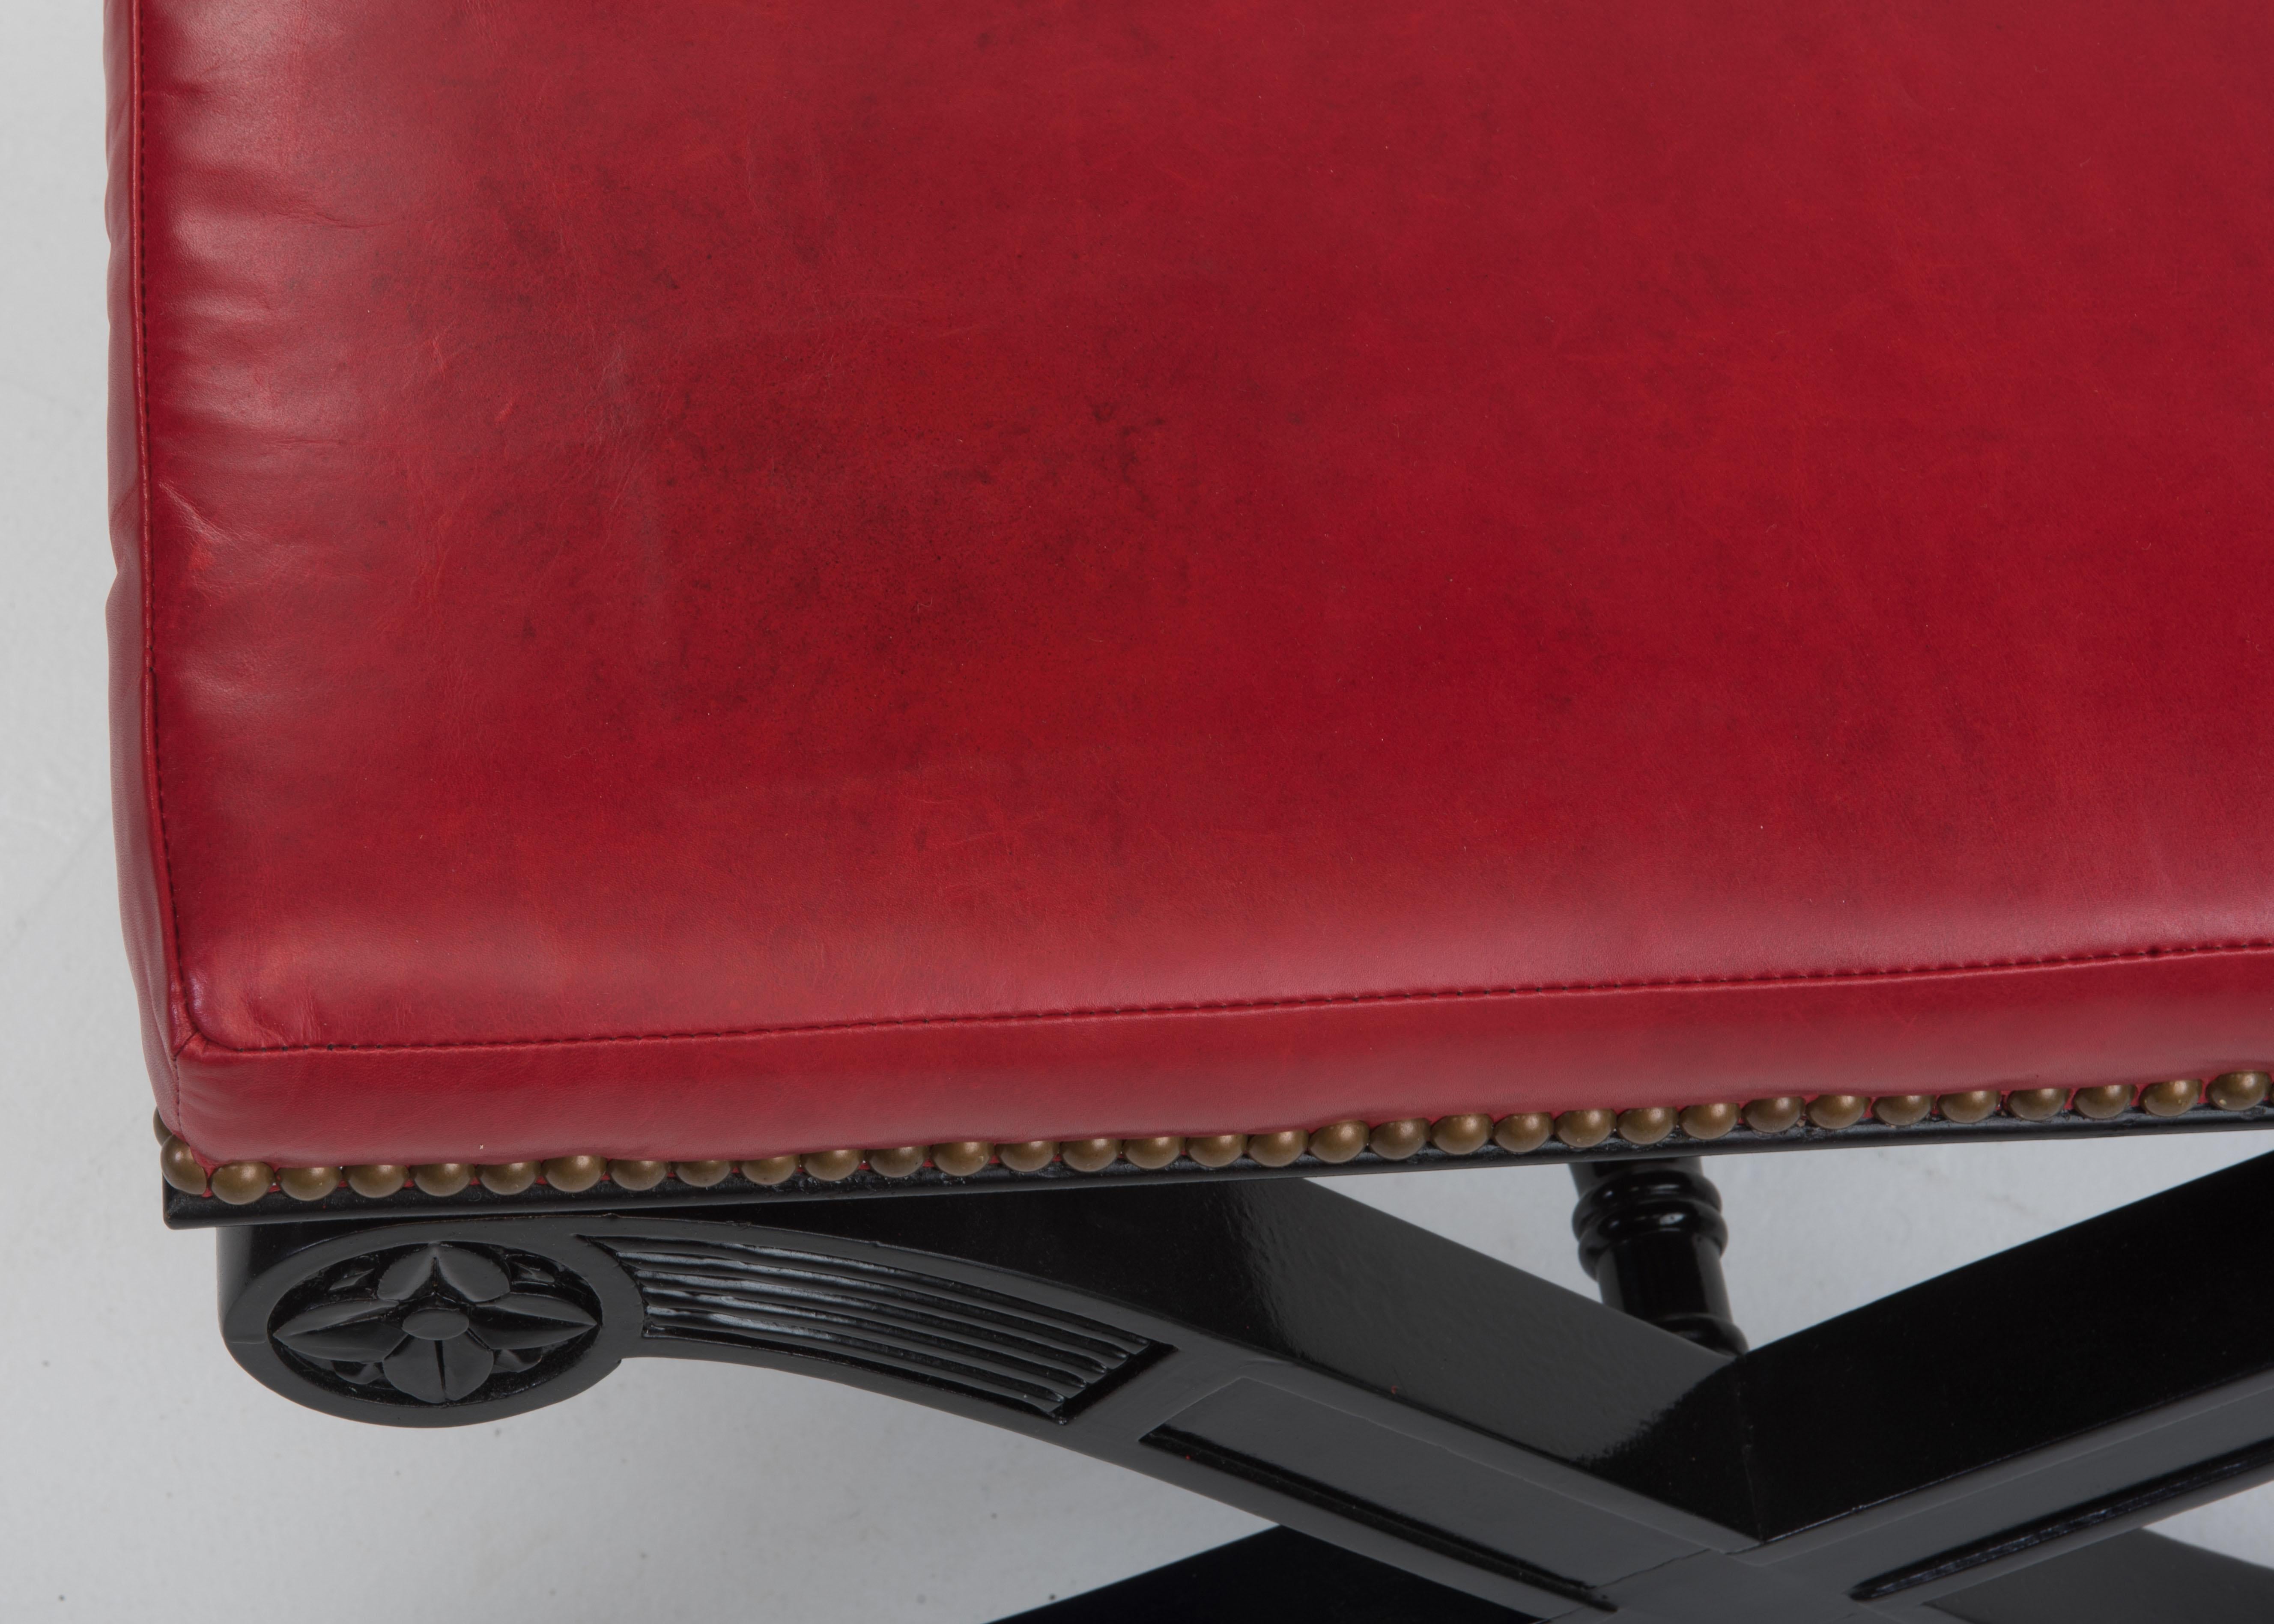 North American Glamorous Pair of Hollywood Regency Ebonized Benches with Red Leather Upholstery